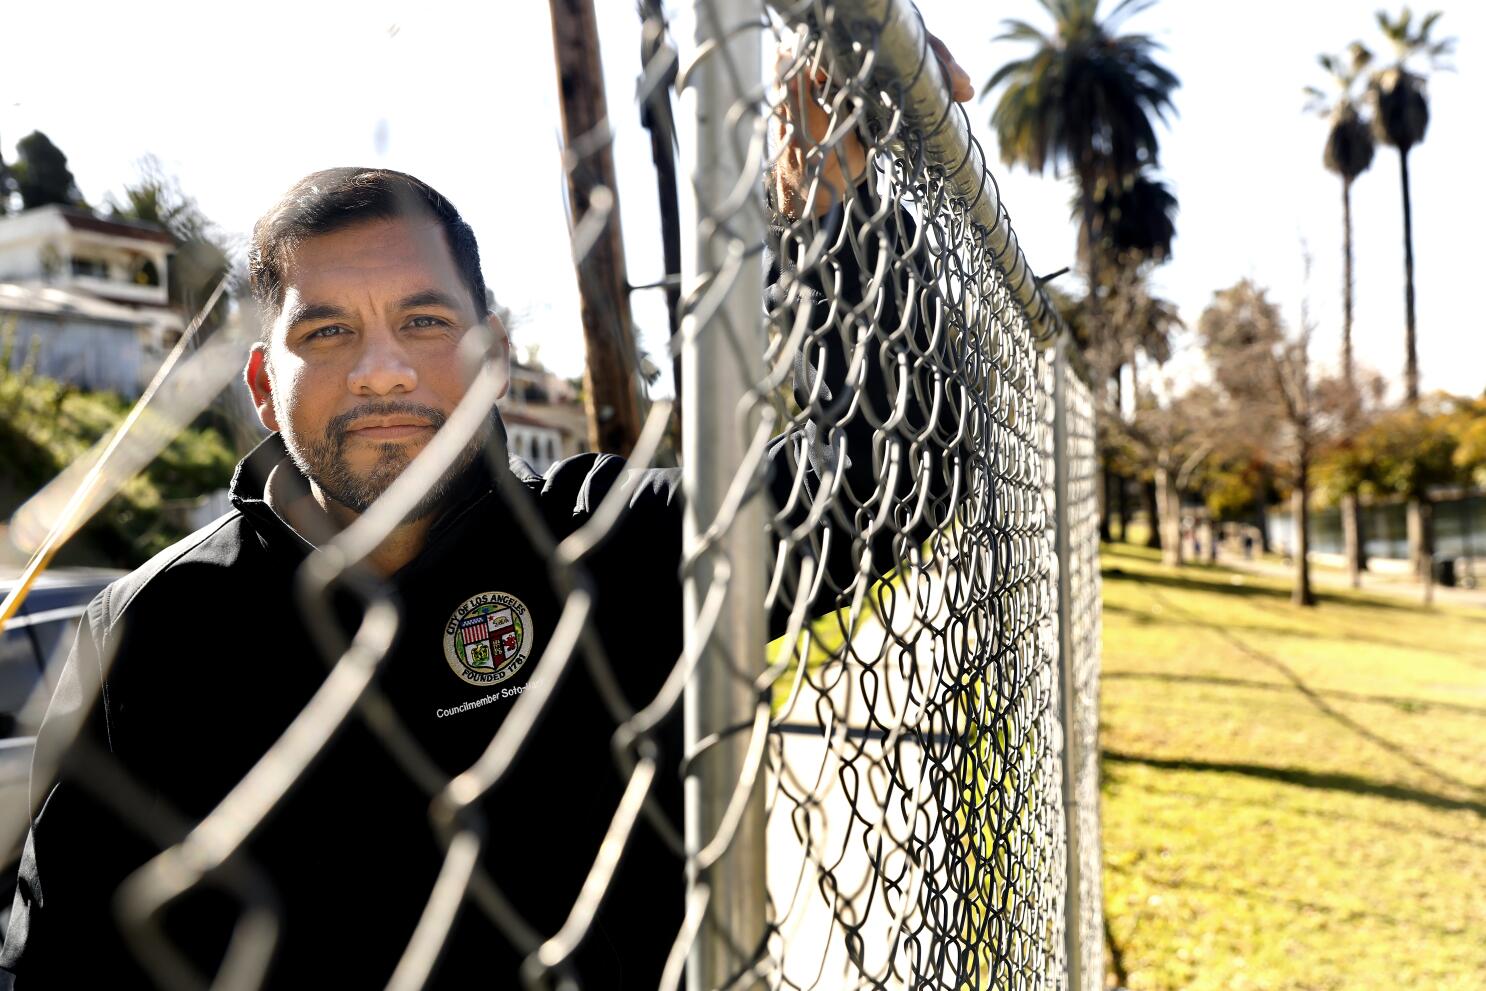 Debate rages on over Echo Park Lake fence - Los Angeles Times